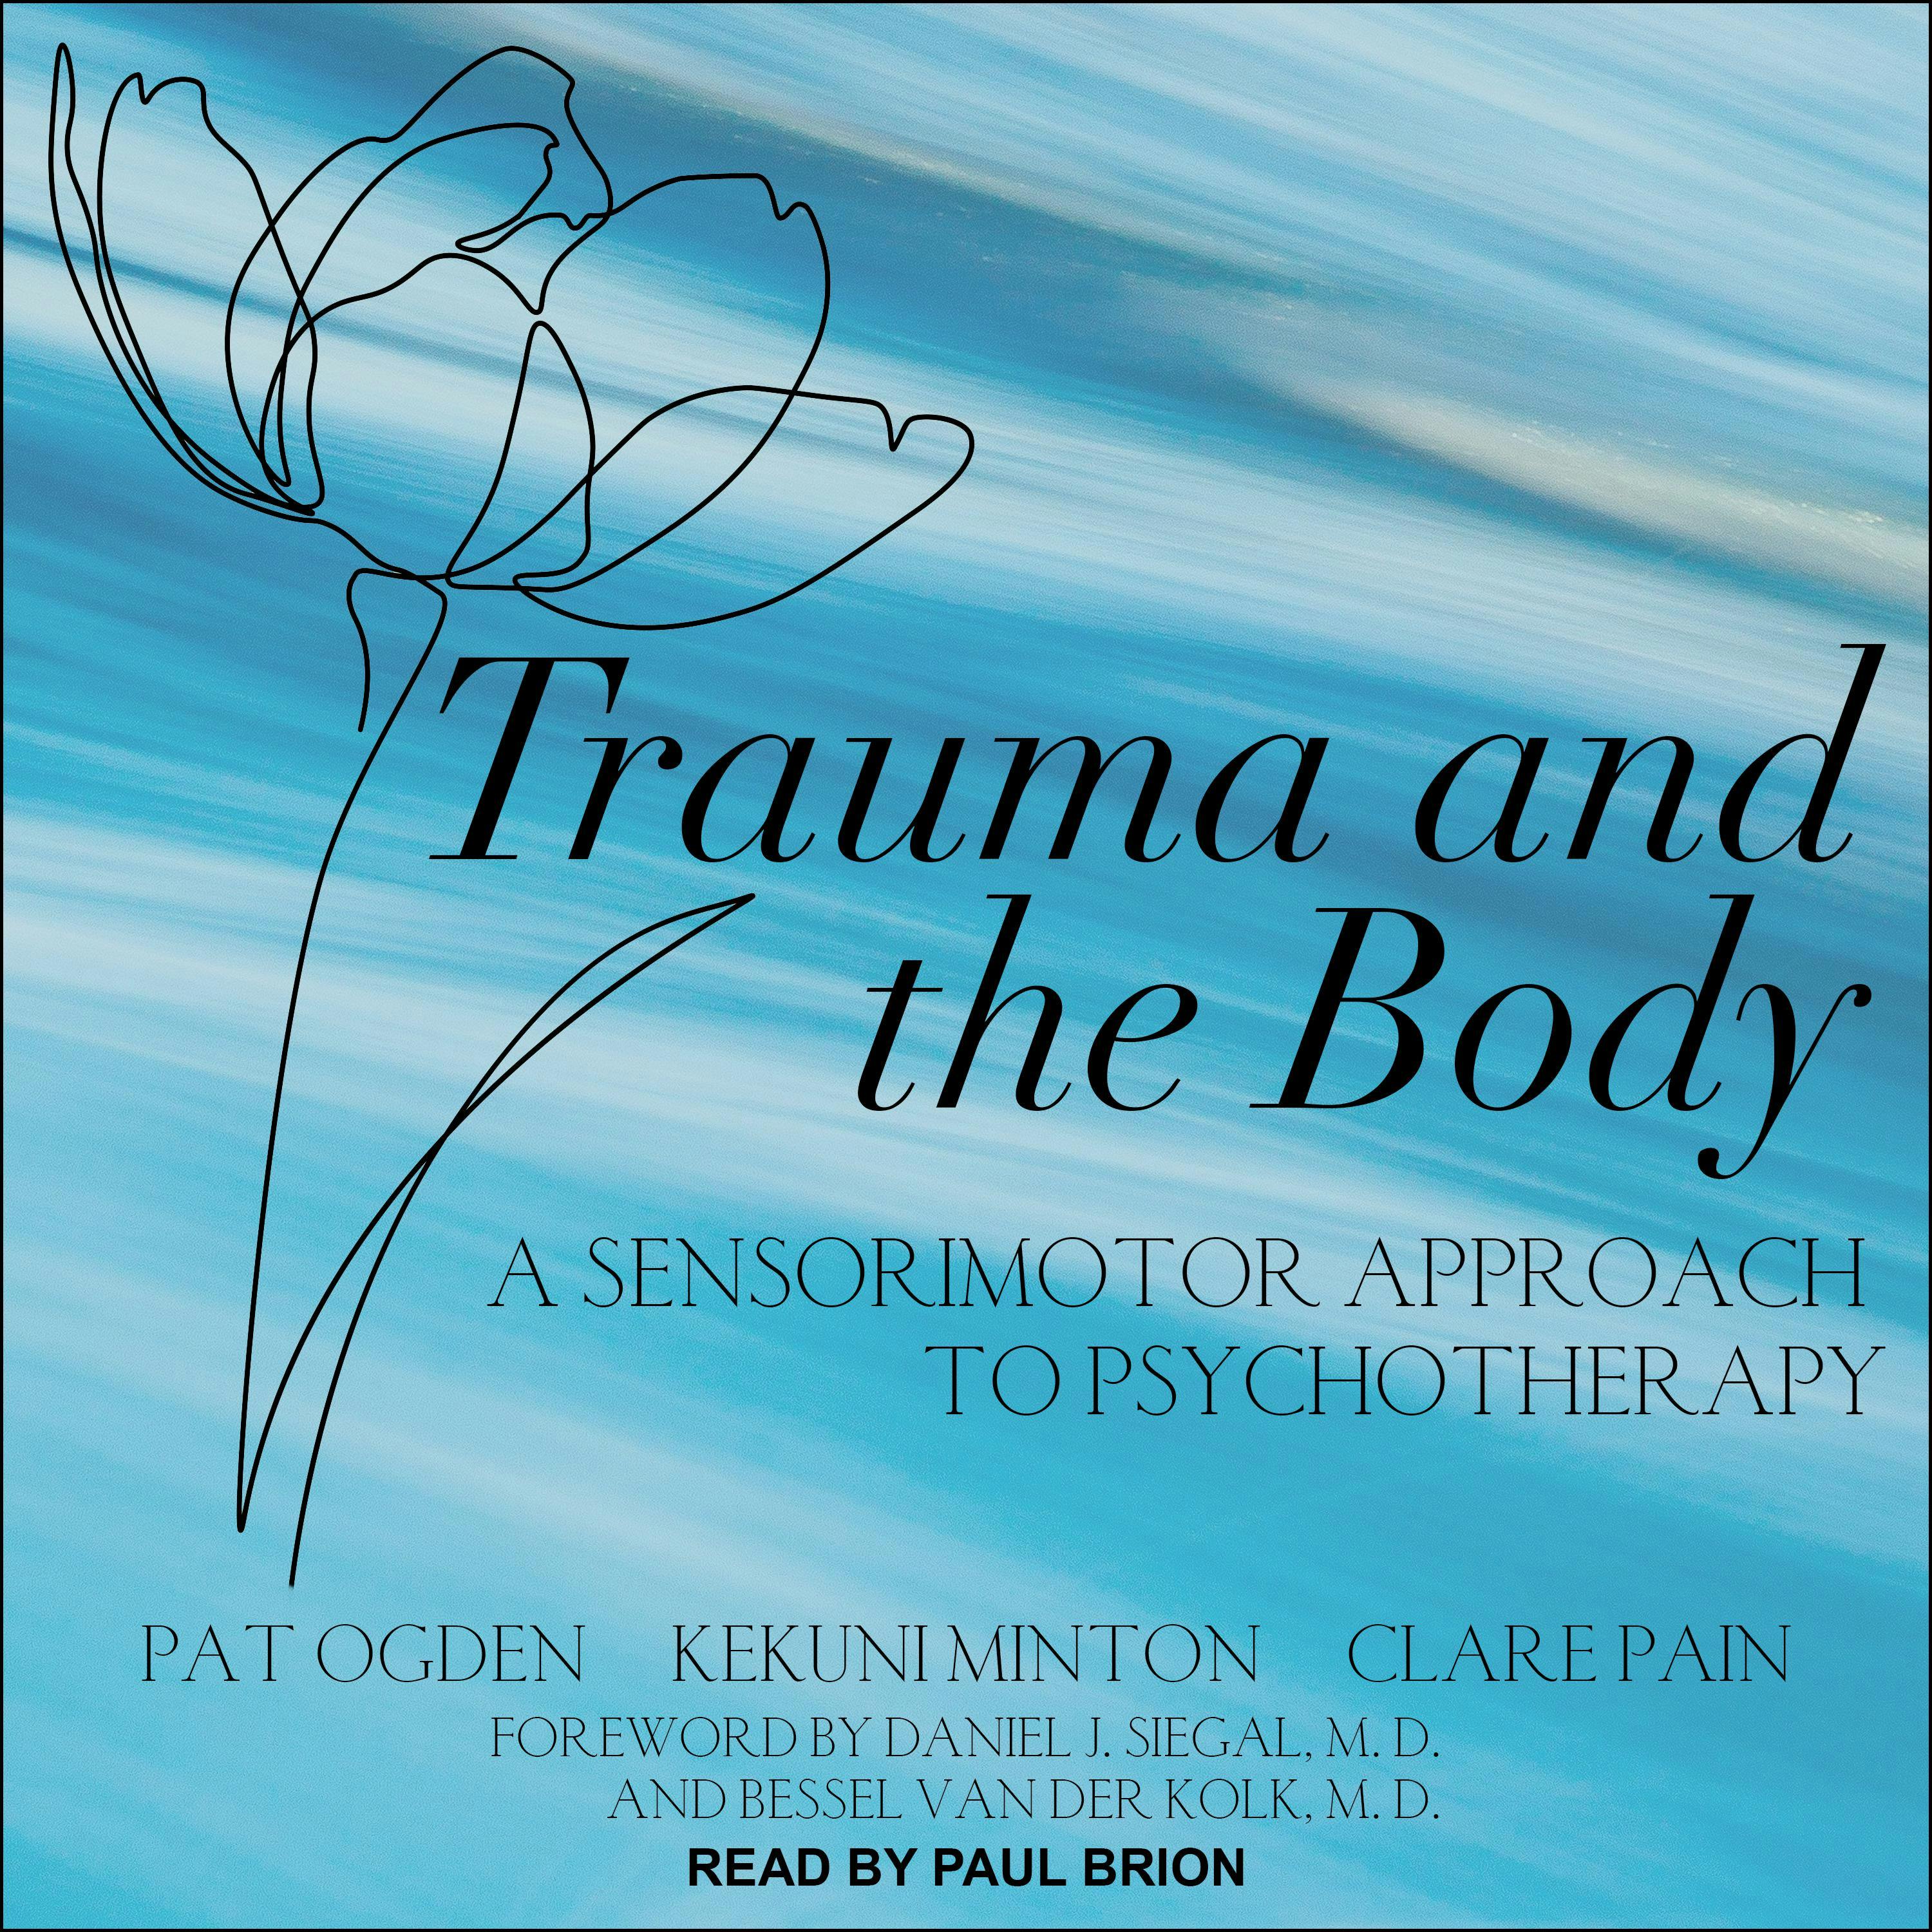 Trauma and the Body: A Sensorimotor Approach to Psychotherapy - undefined